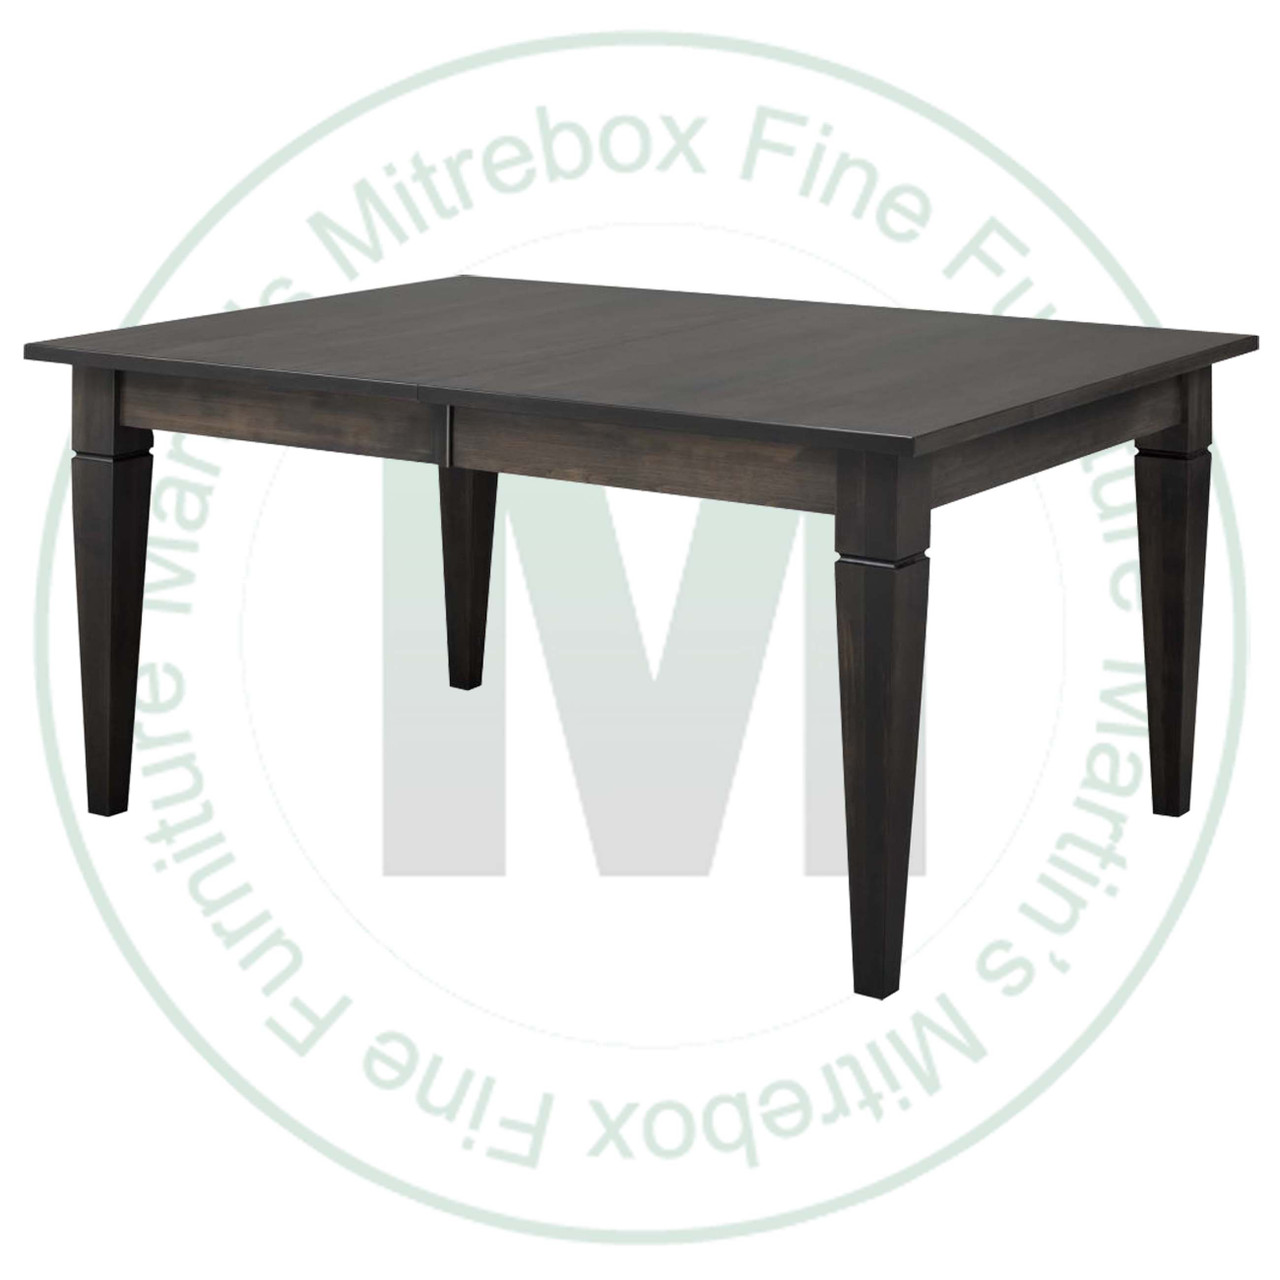 Wormy Maple Reesor Extension Harvest Table 48''D x 60''W x 30''H With 3 - 12'' Leaves Table Has 1.25'' Thick Top